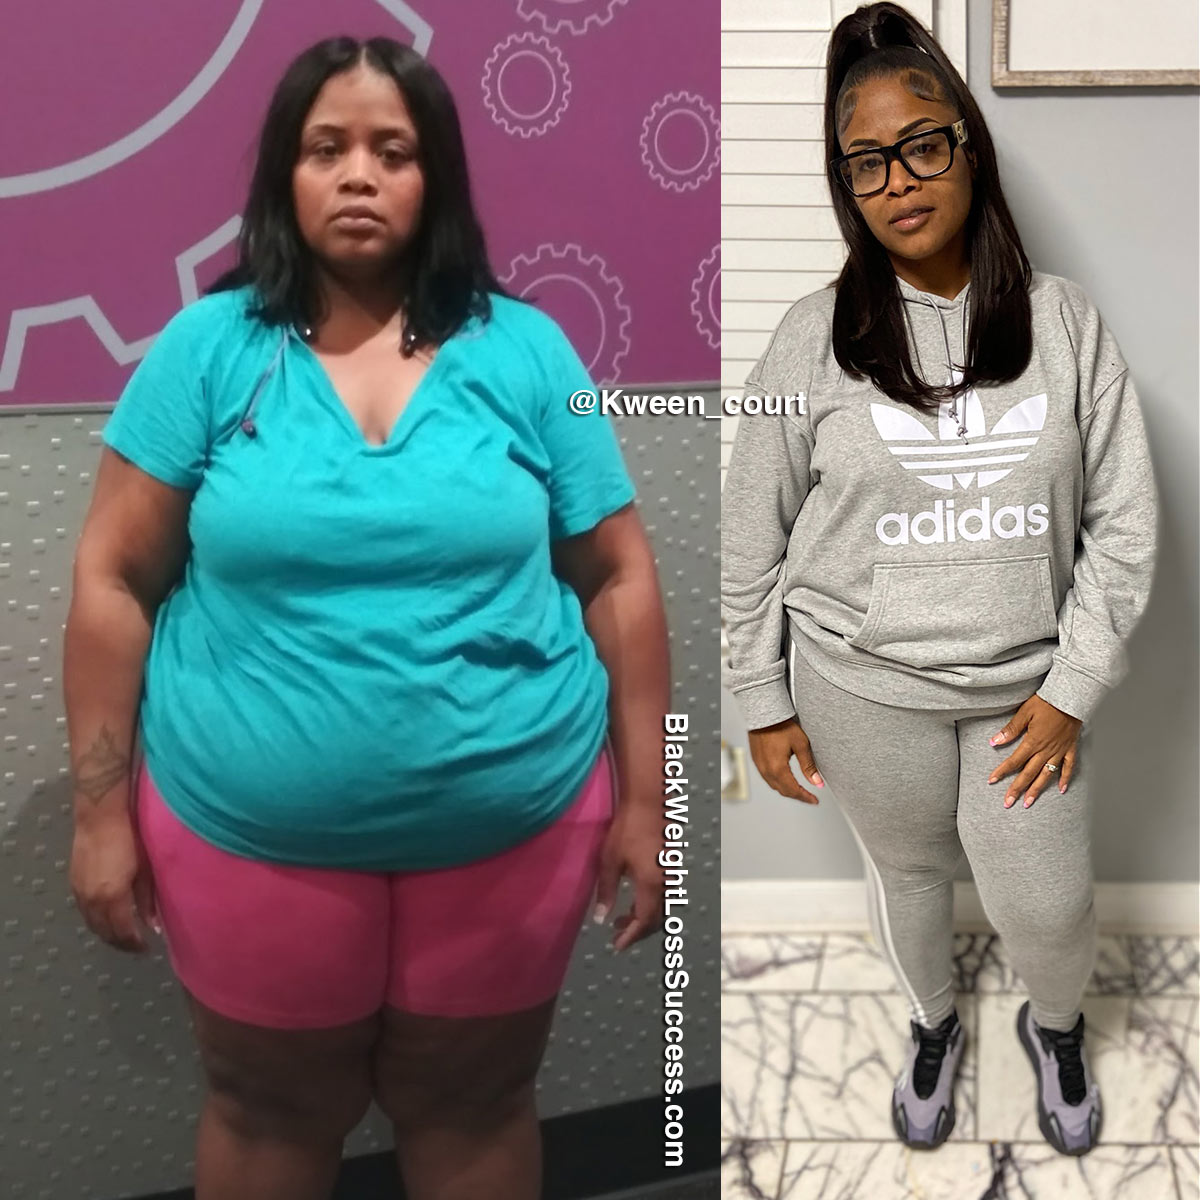 Courtney before and after weight loss